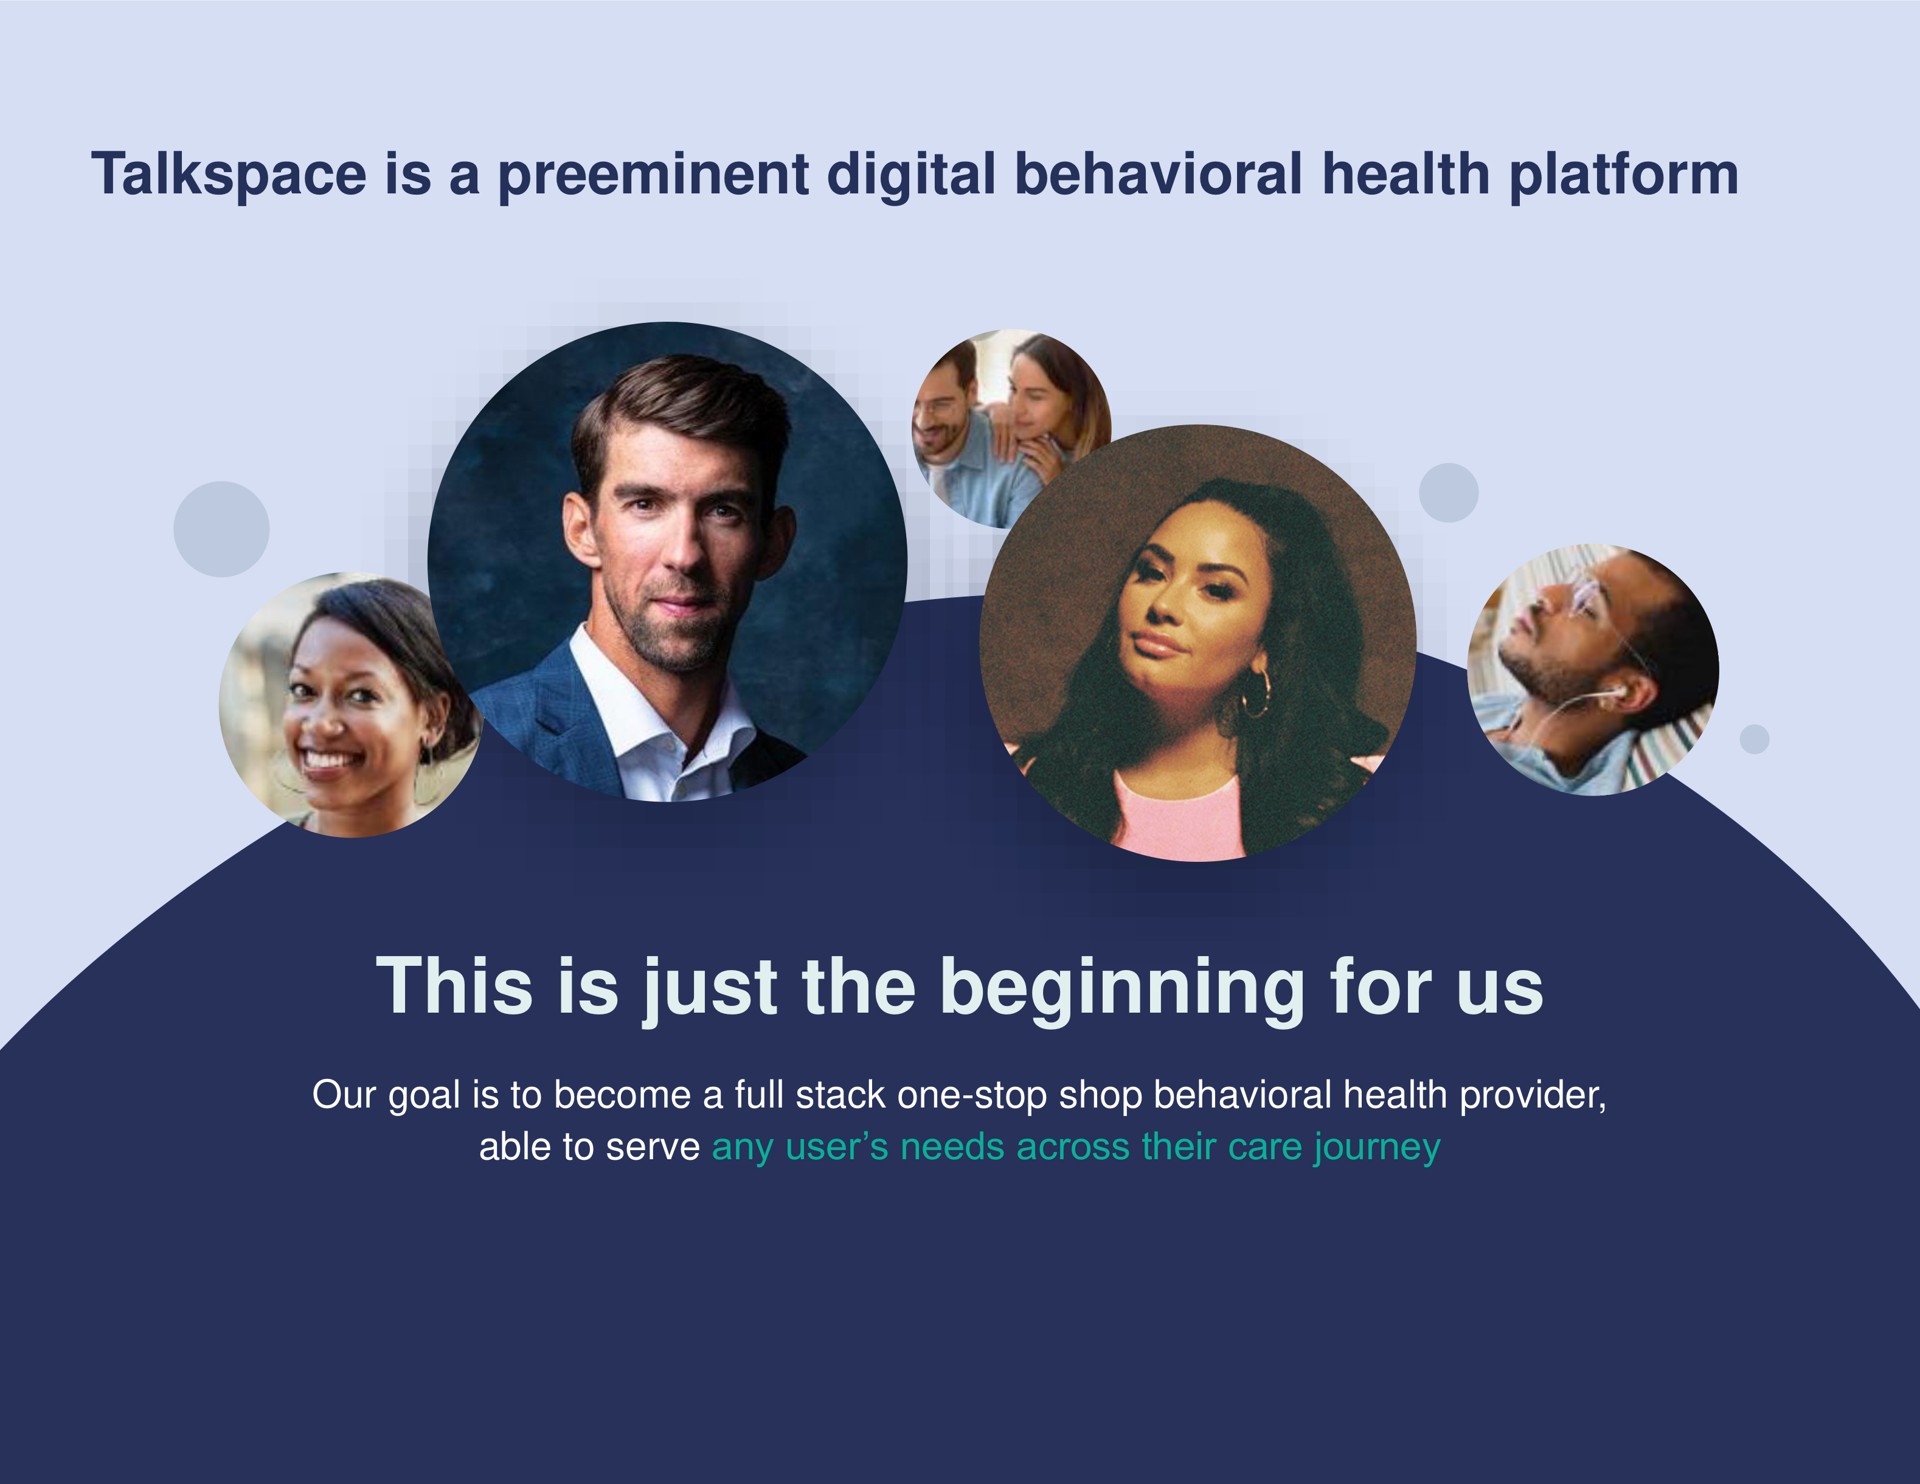 is a digital behavioral health platform this is just the beginning for us | Talkspace